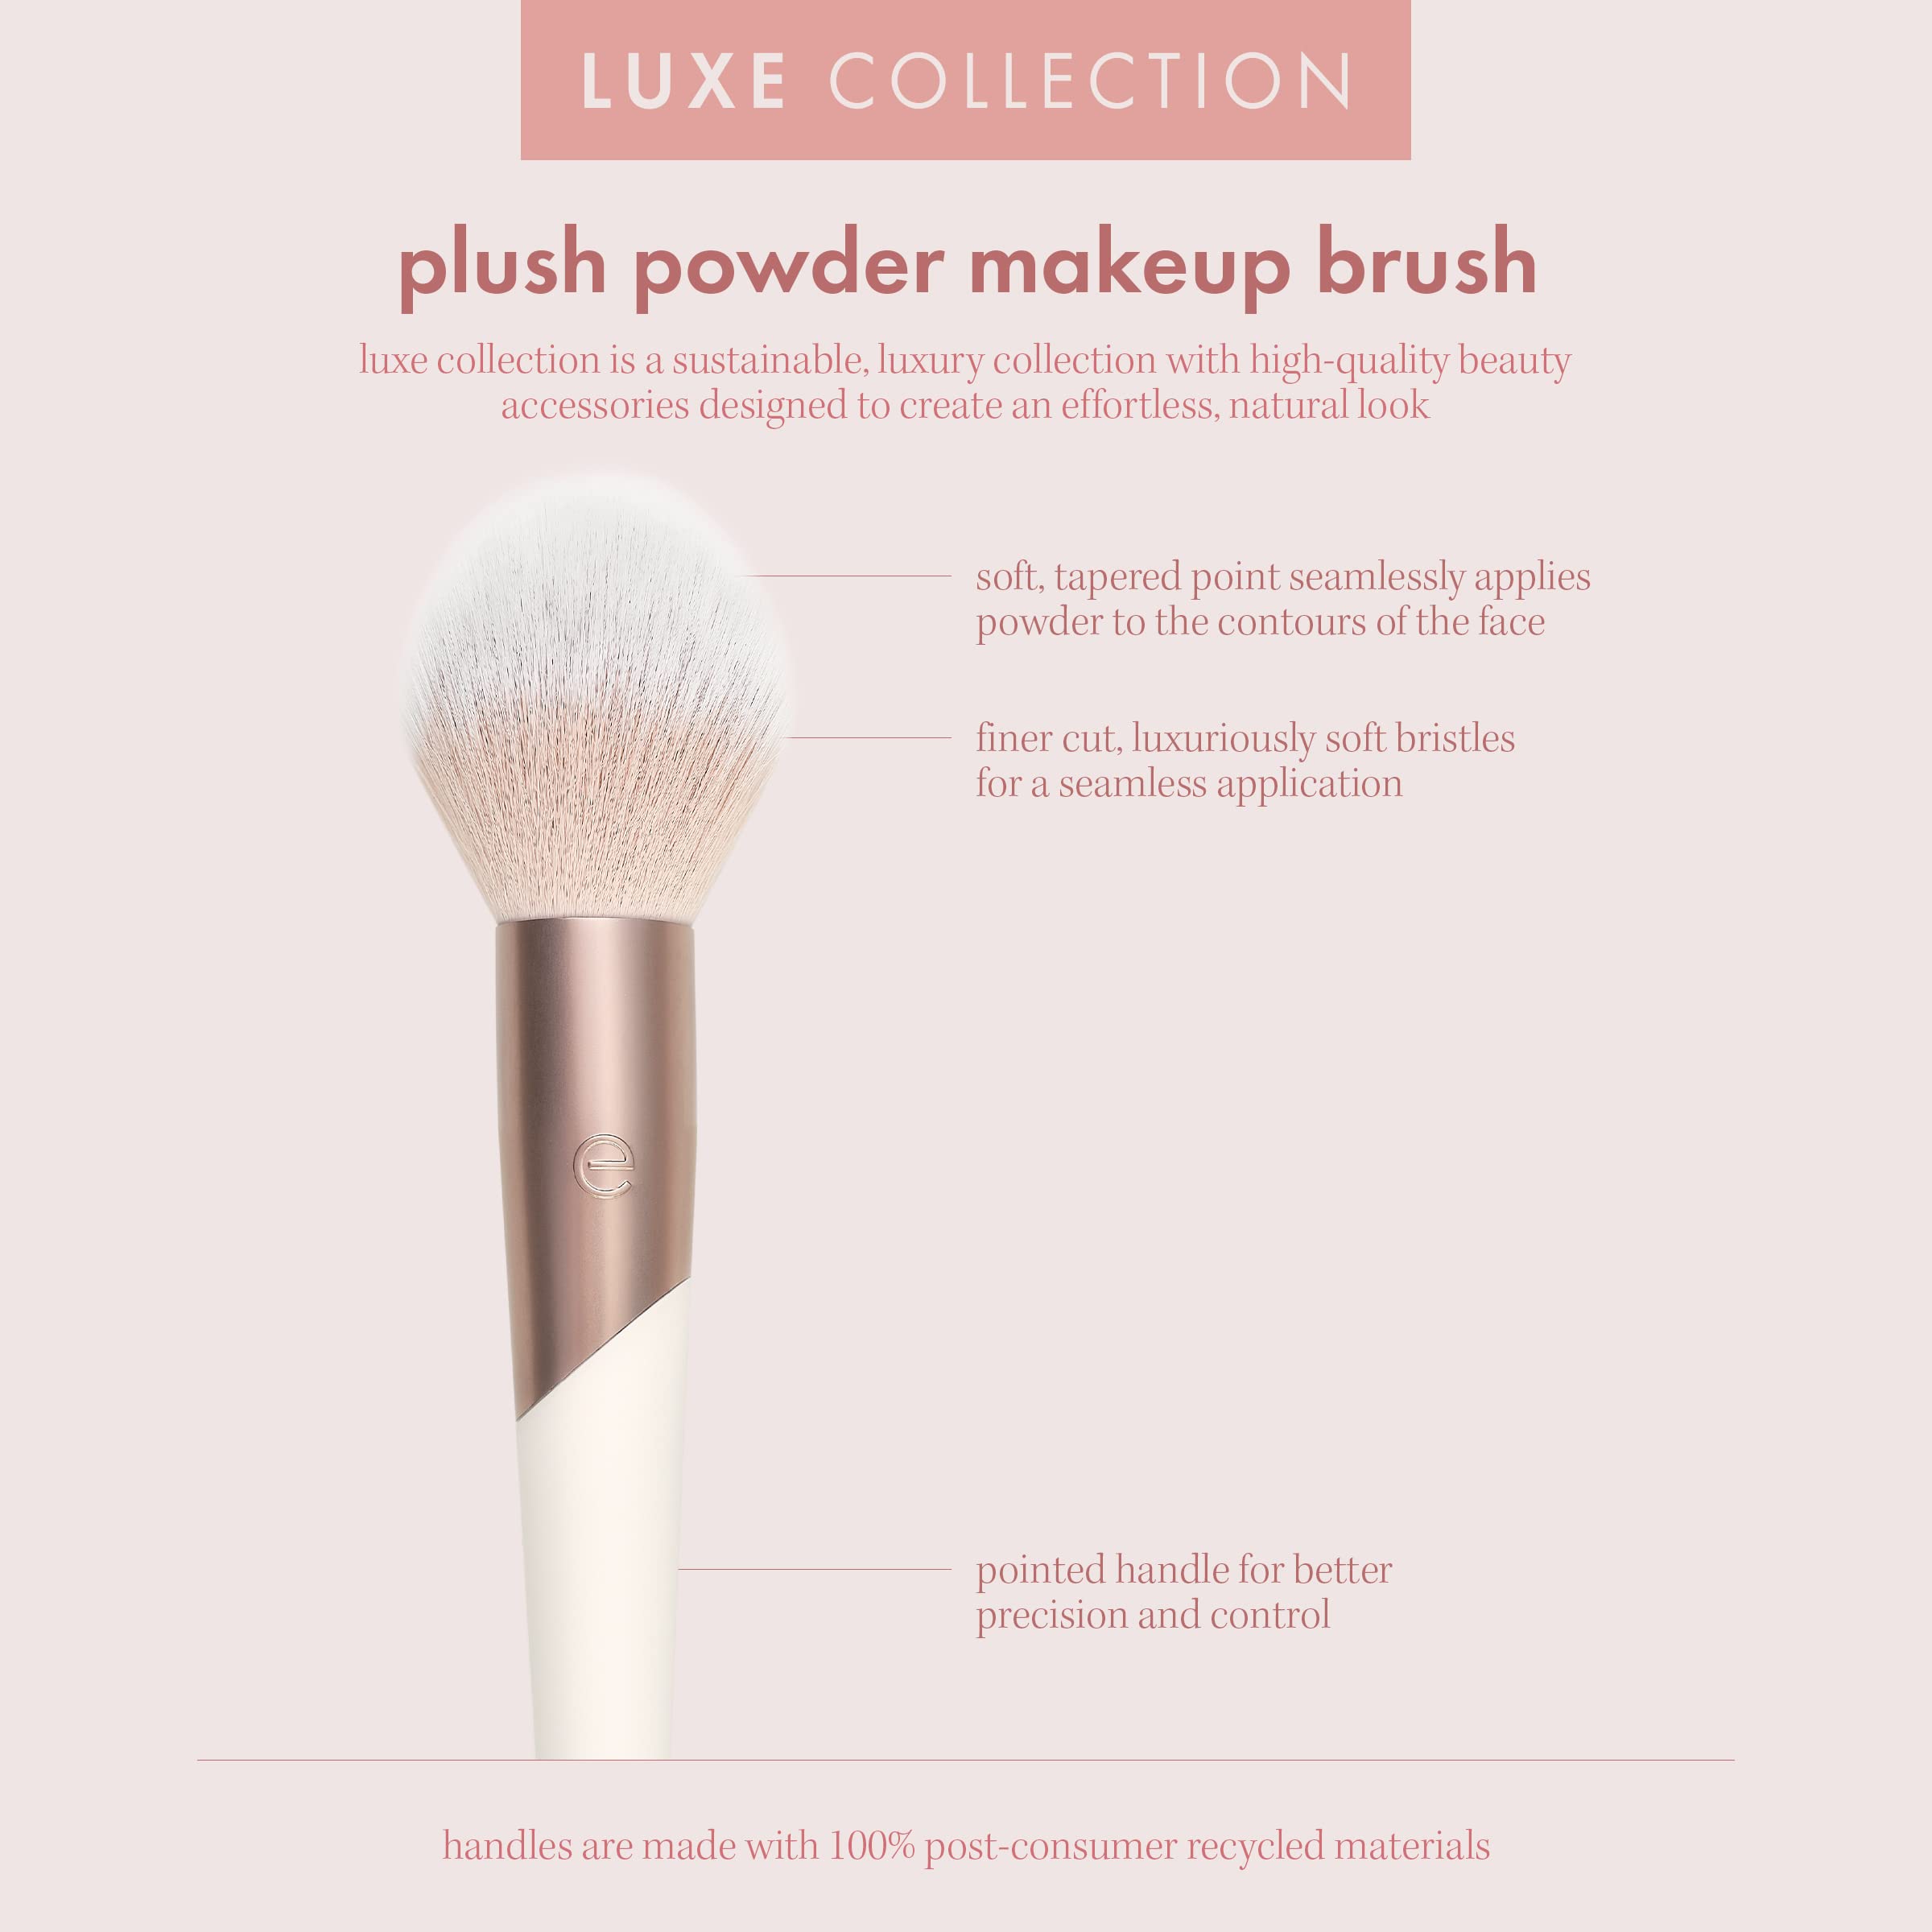 EcoTools Luxe Plush Powder Makeup Brush for Blush & Bronzer, Works Best With Powder Makeup, Luxurious and Glamorous, Eco-Friendly Premium Makeup Brush, Synthetic Bristles, Pink, 1 Count